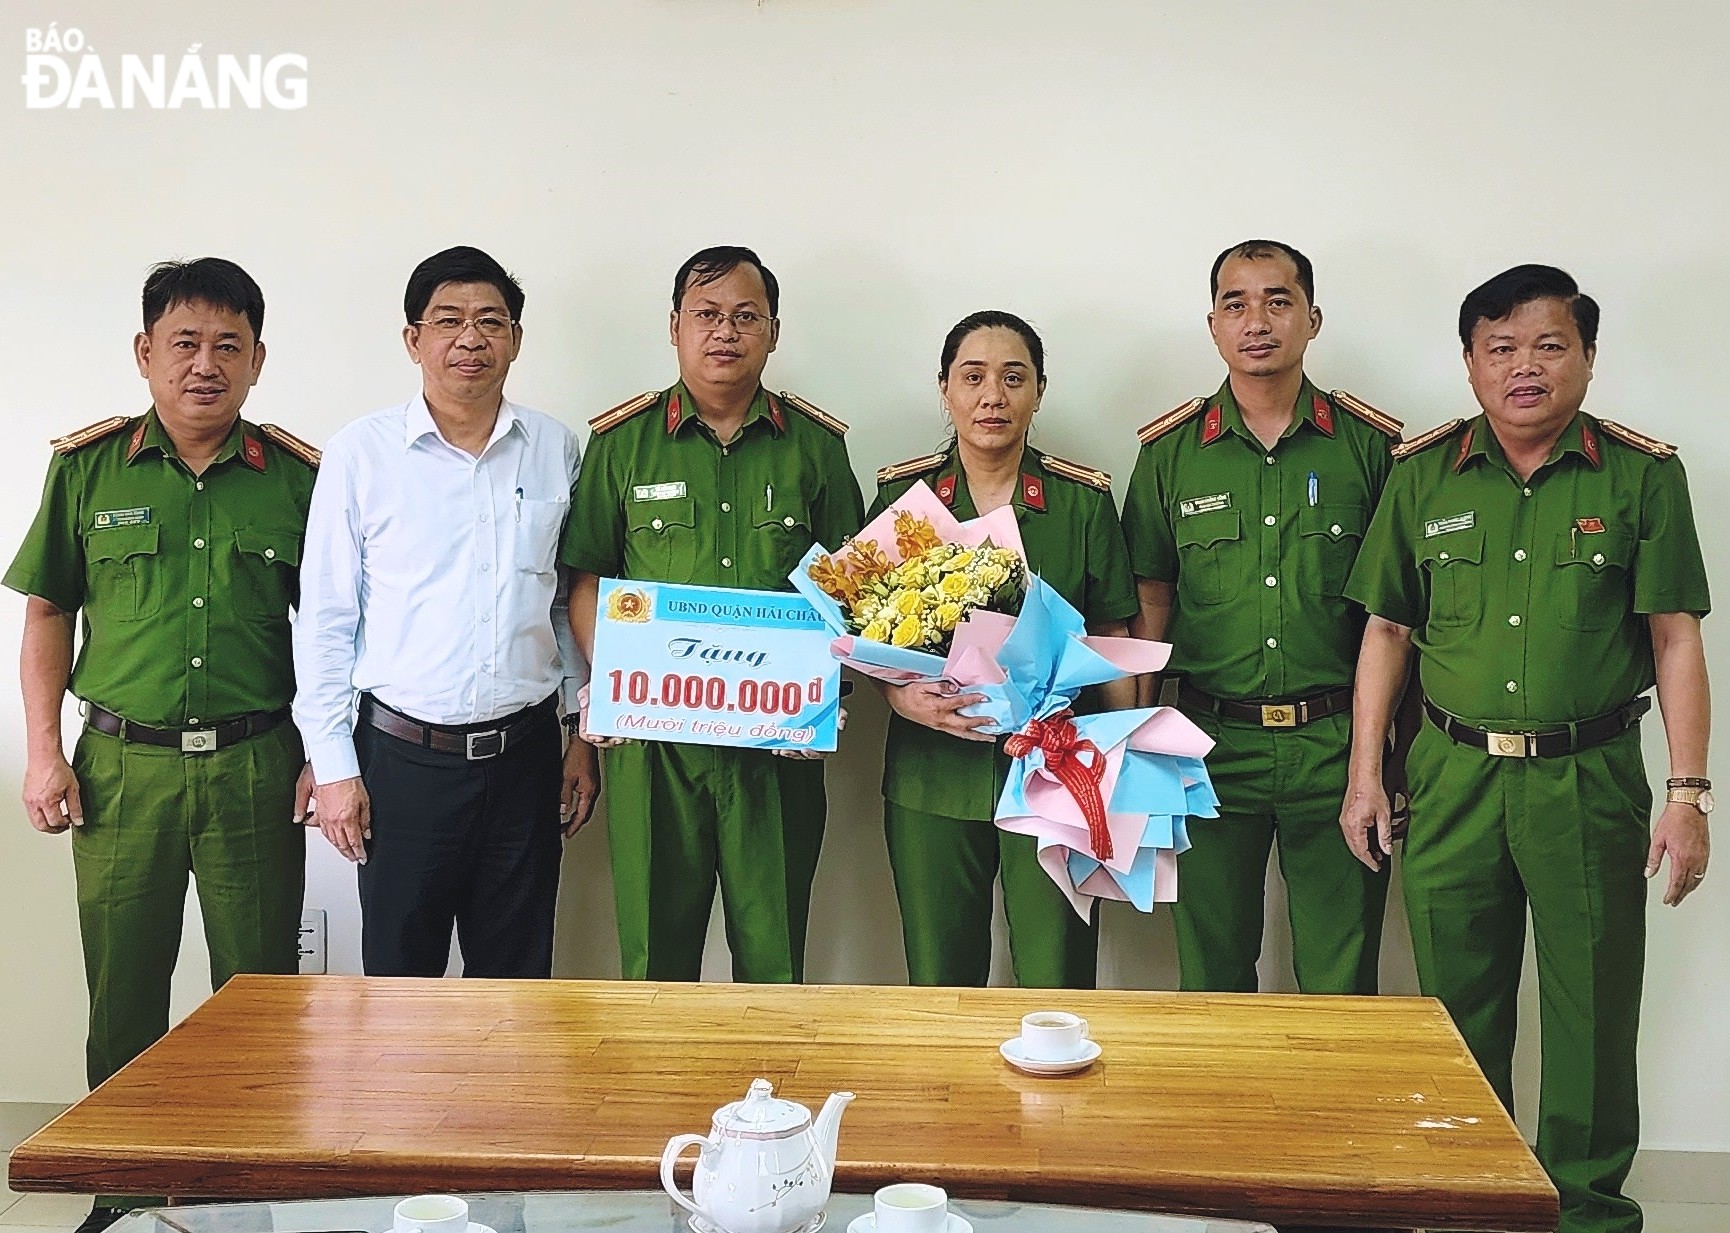 Vice Chairman of Hai Chau District People's Committee Truong Thanh Dung (second, left) rewarding a bonus of VND10 million to the Drug-related Crime Investigation Police Team under the Hai Chau District Department of Public Security. Photo: Ngoc Quoc